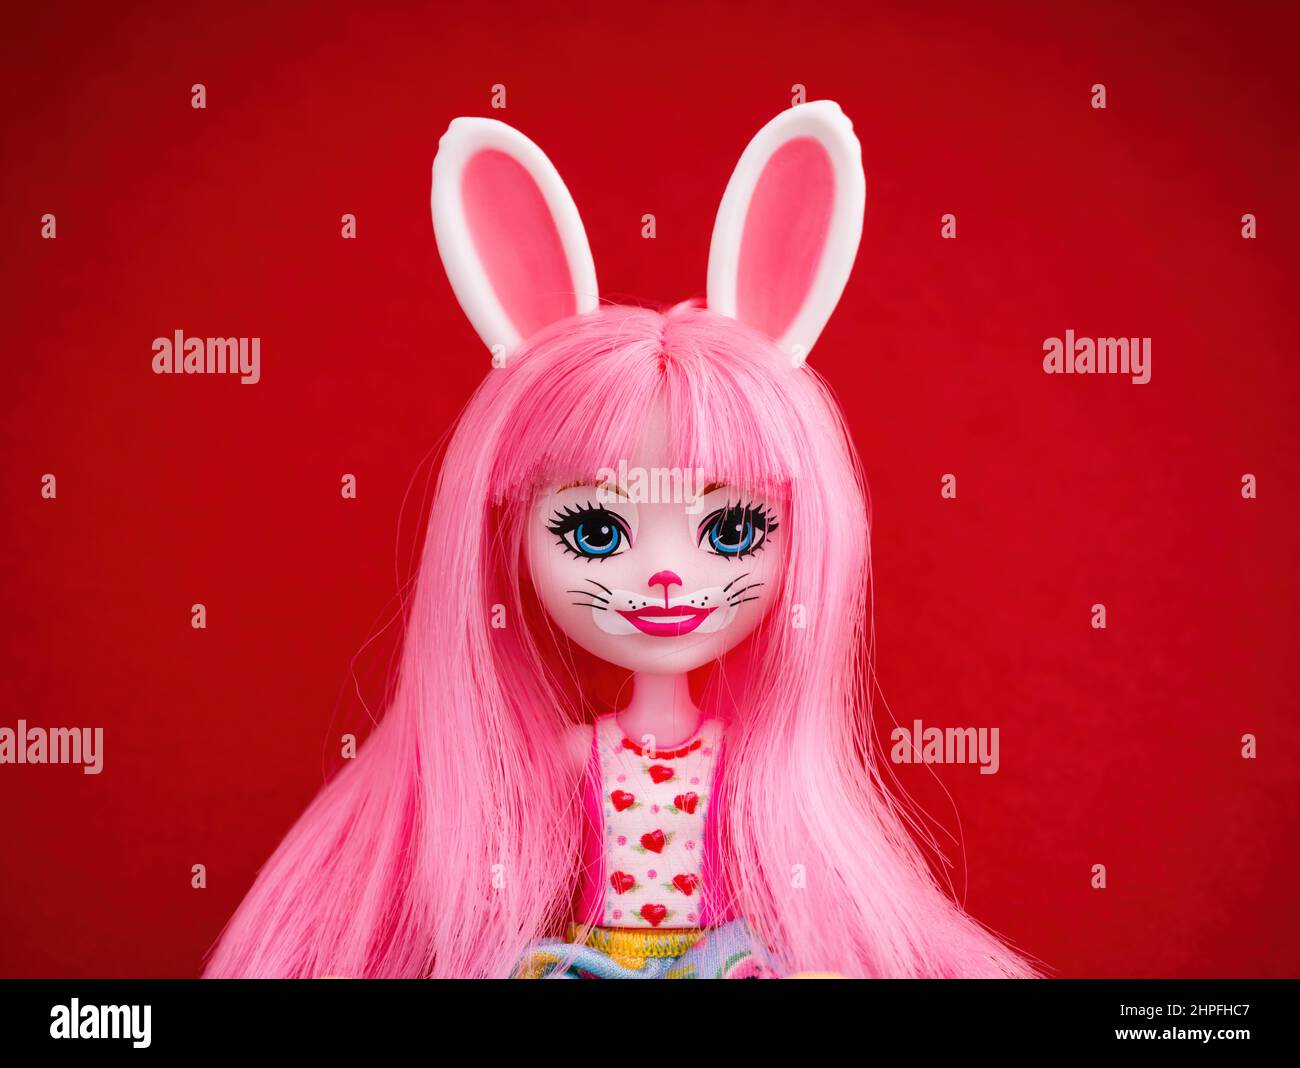 Tambov, Russian Federation - February 15, 2022 Portrait of a Mattel Enchantimals Bree Bunny Doll against red background. Stock Photo